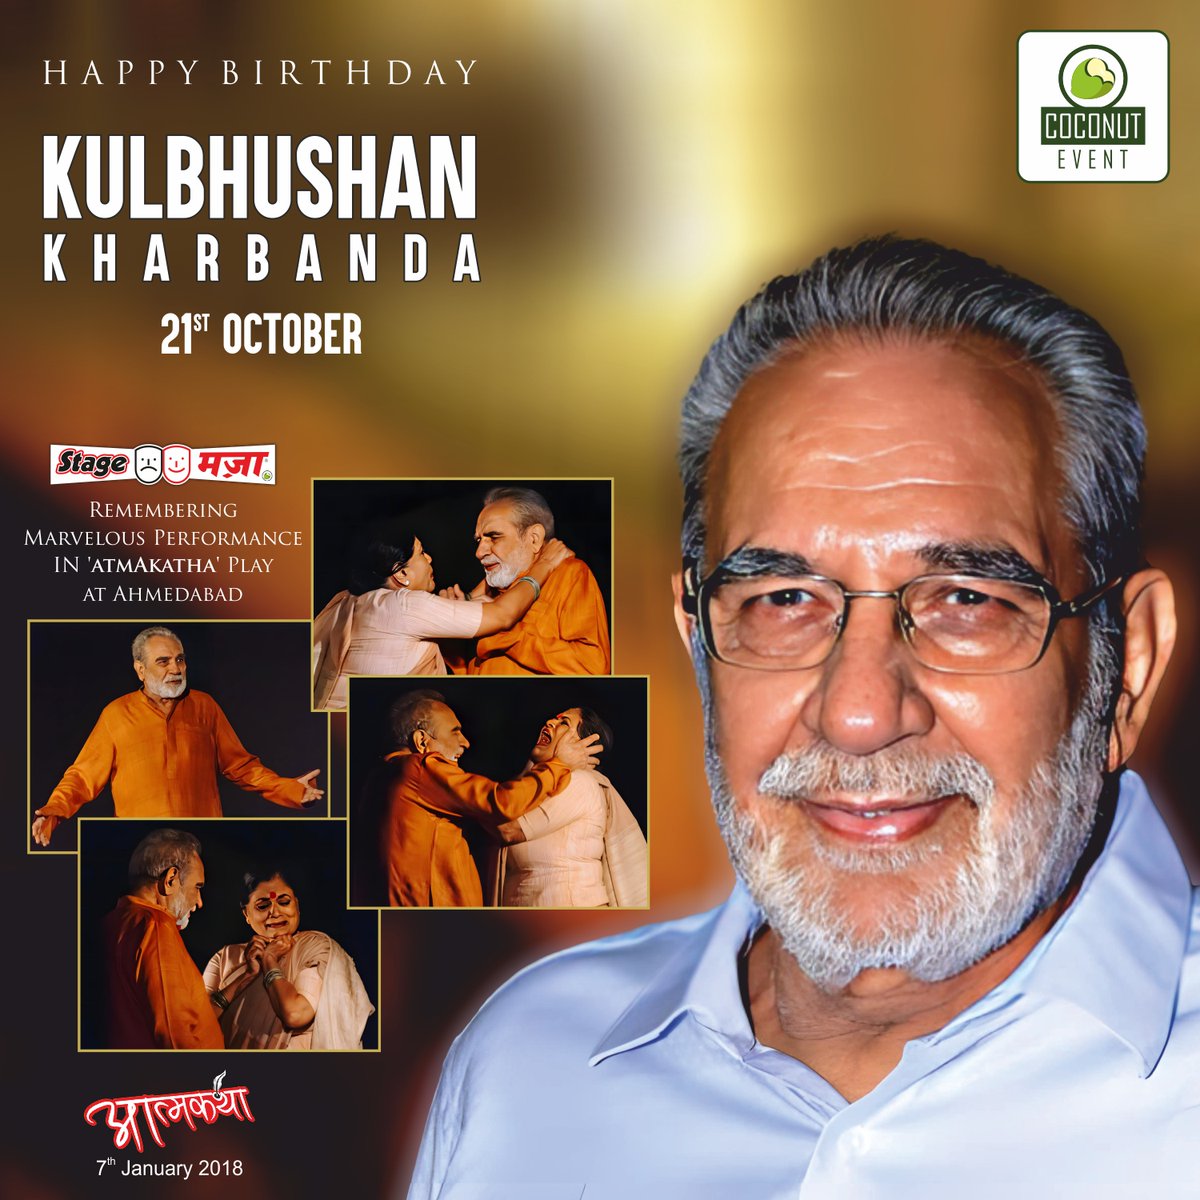 Happy Birthday, #KulbhushanKharbanda! As the spotlight turns to another year, #CoconutEvent and #StageMazaa honour your incredible journey!

#Atmakatha #Artist #TheatreArtist #HappyBirthday #HappyBirthdayToYou #Greetings #BirthdayWishes #Blessings #Wishes